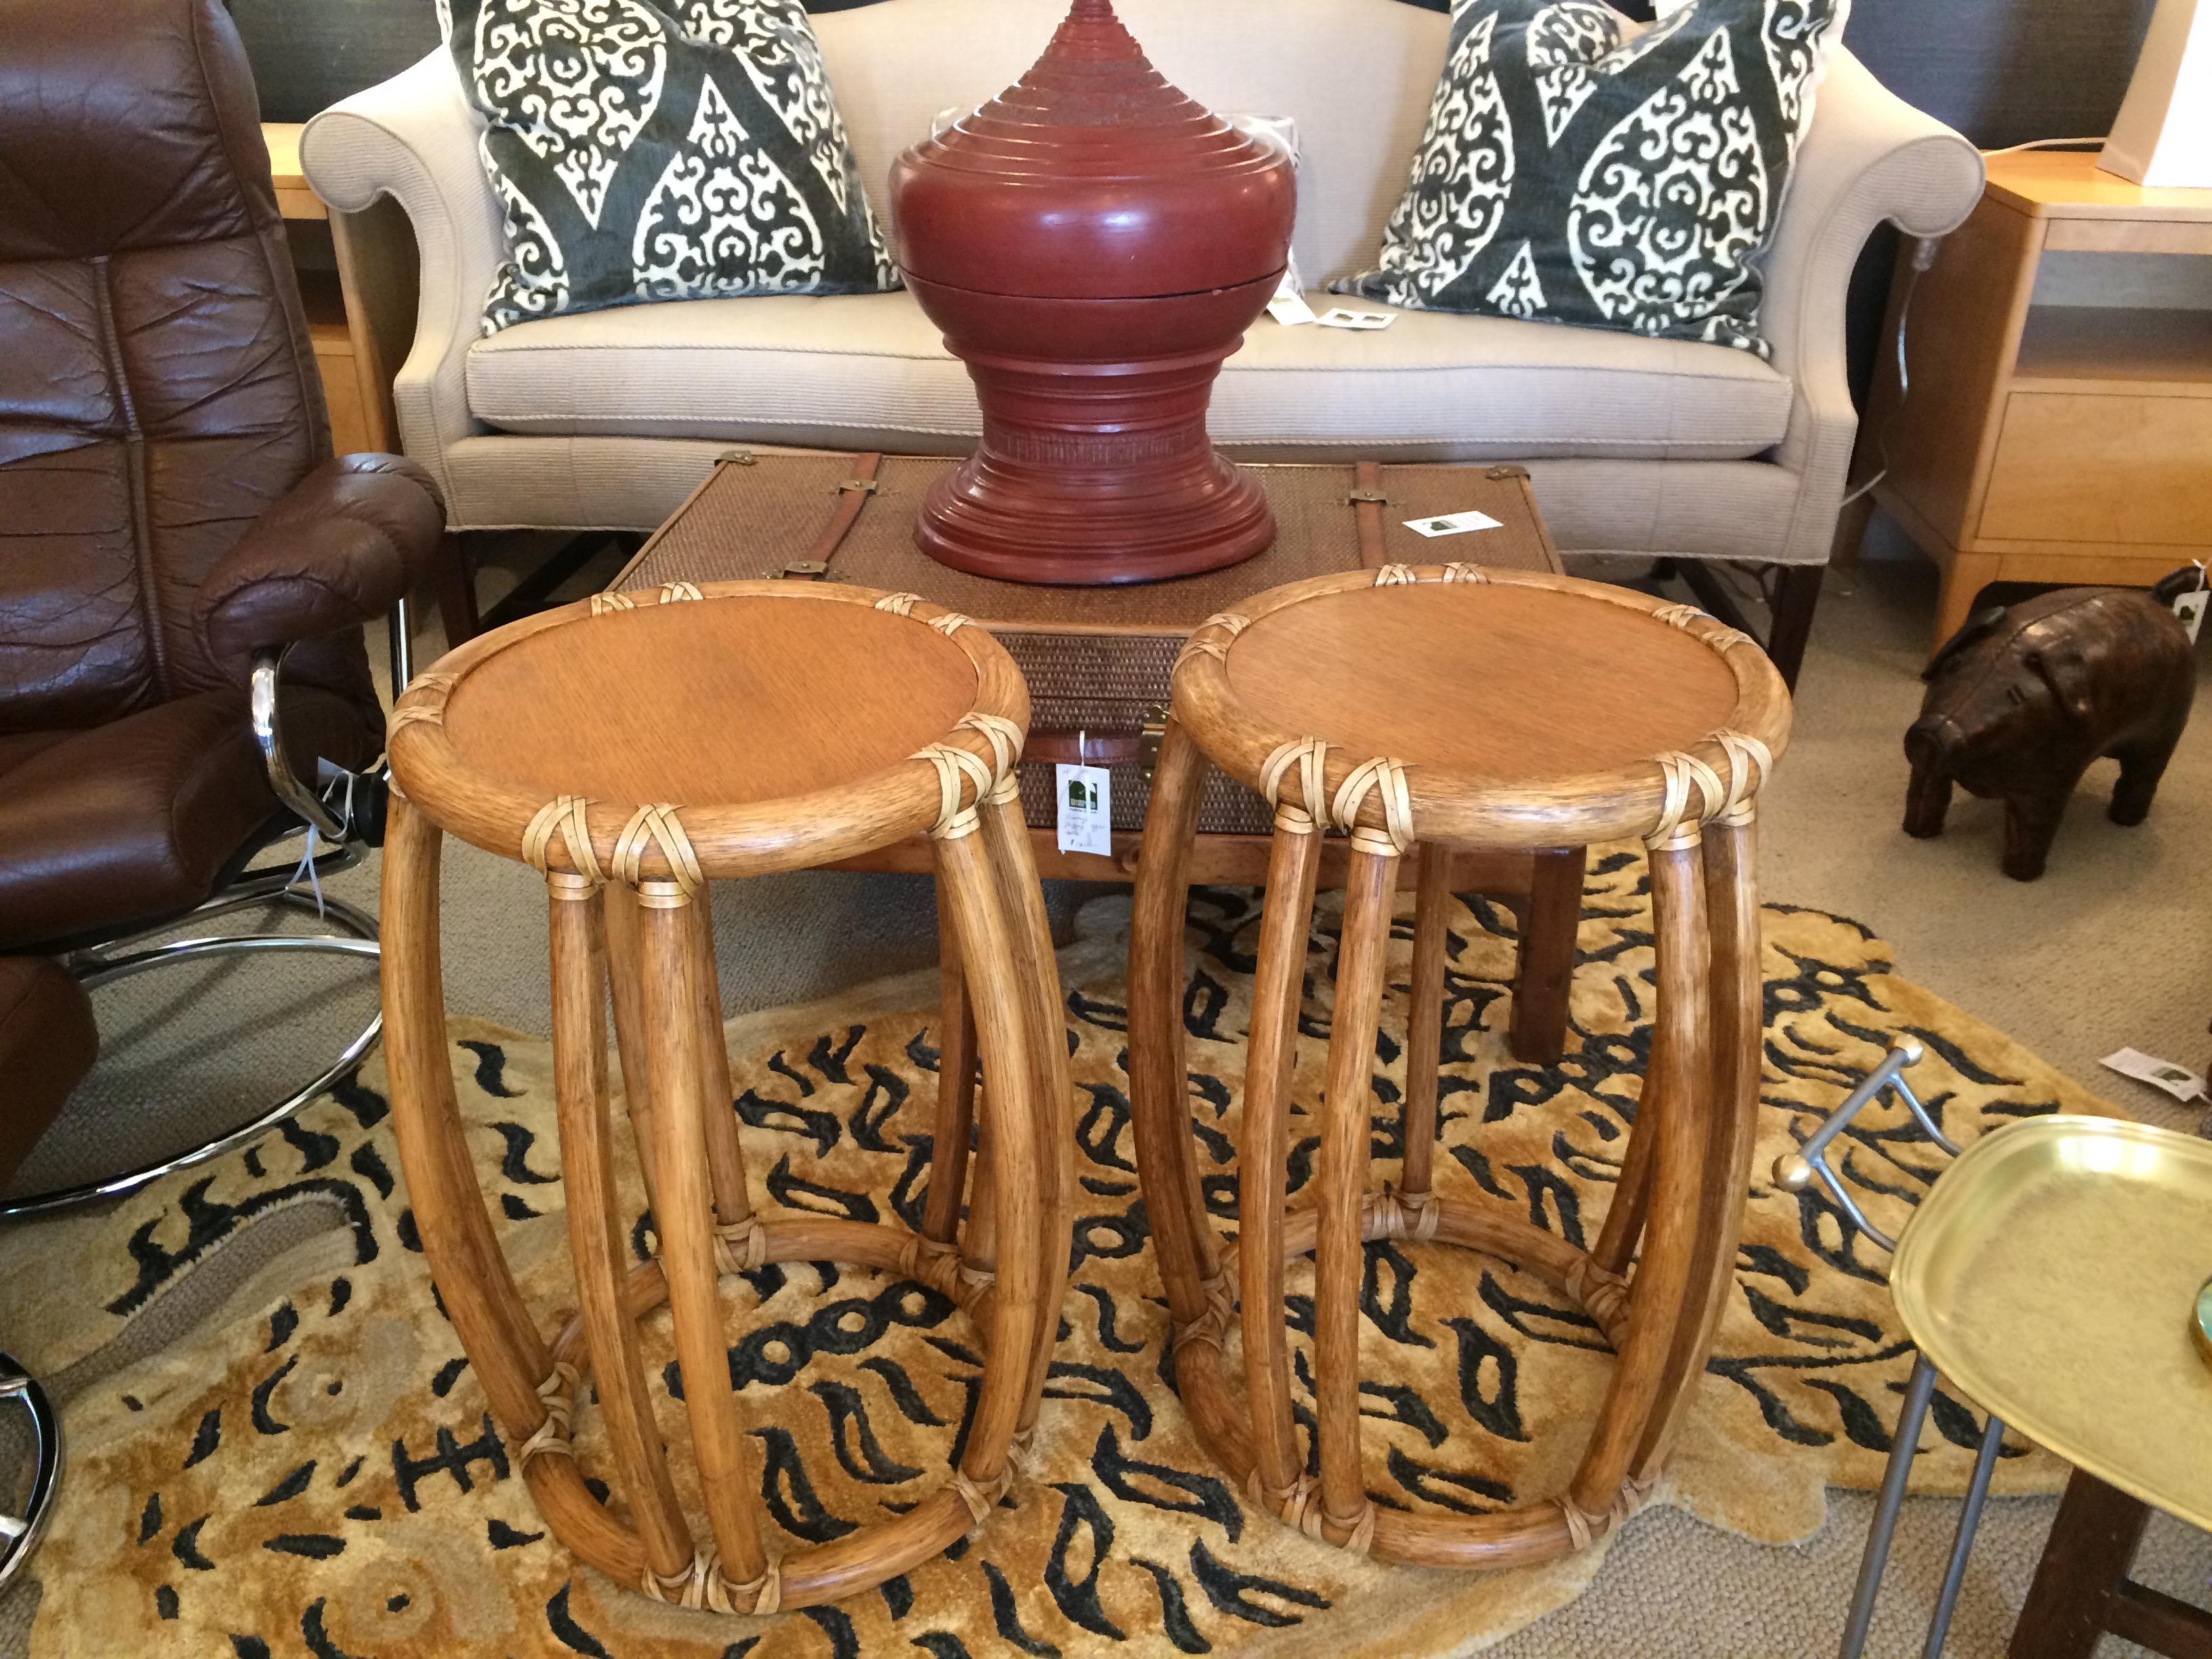 Two handsome rattan tall round side tables by McGuire.